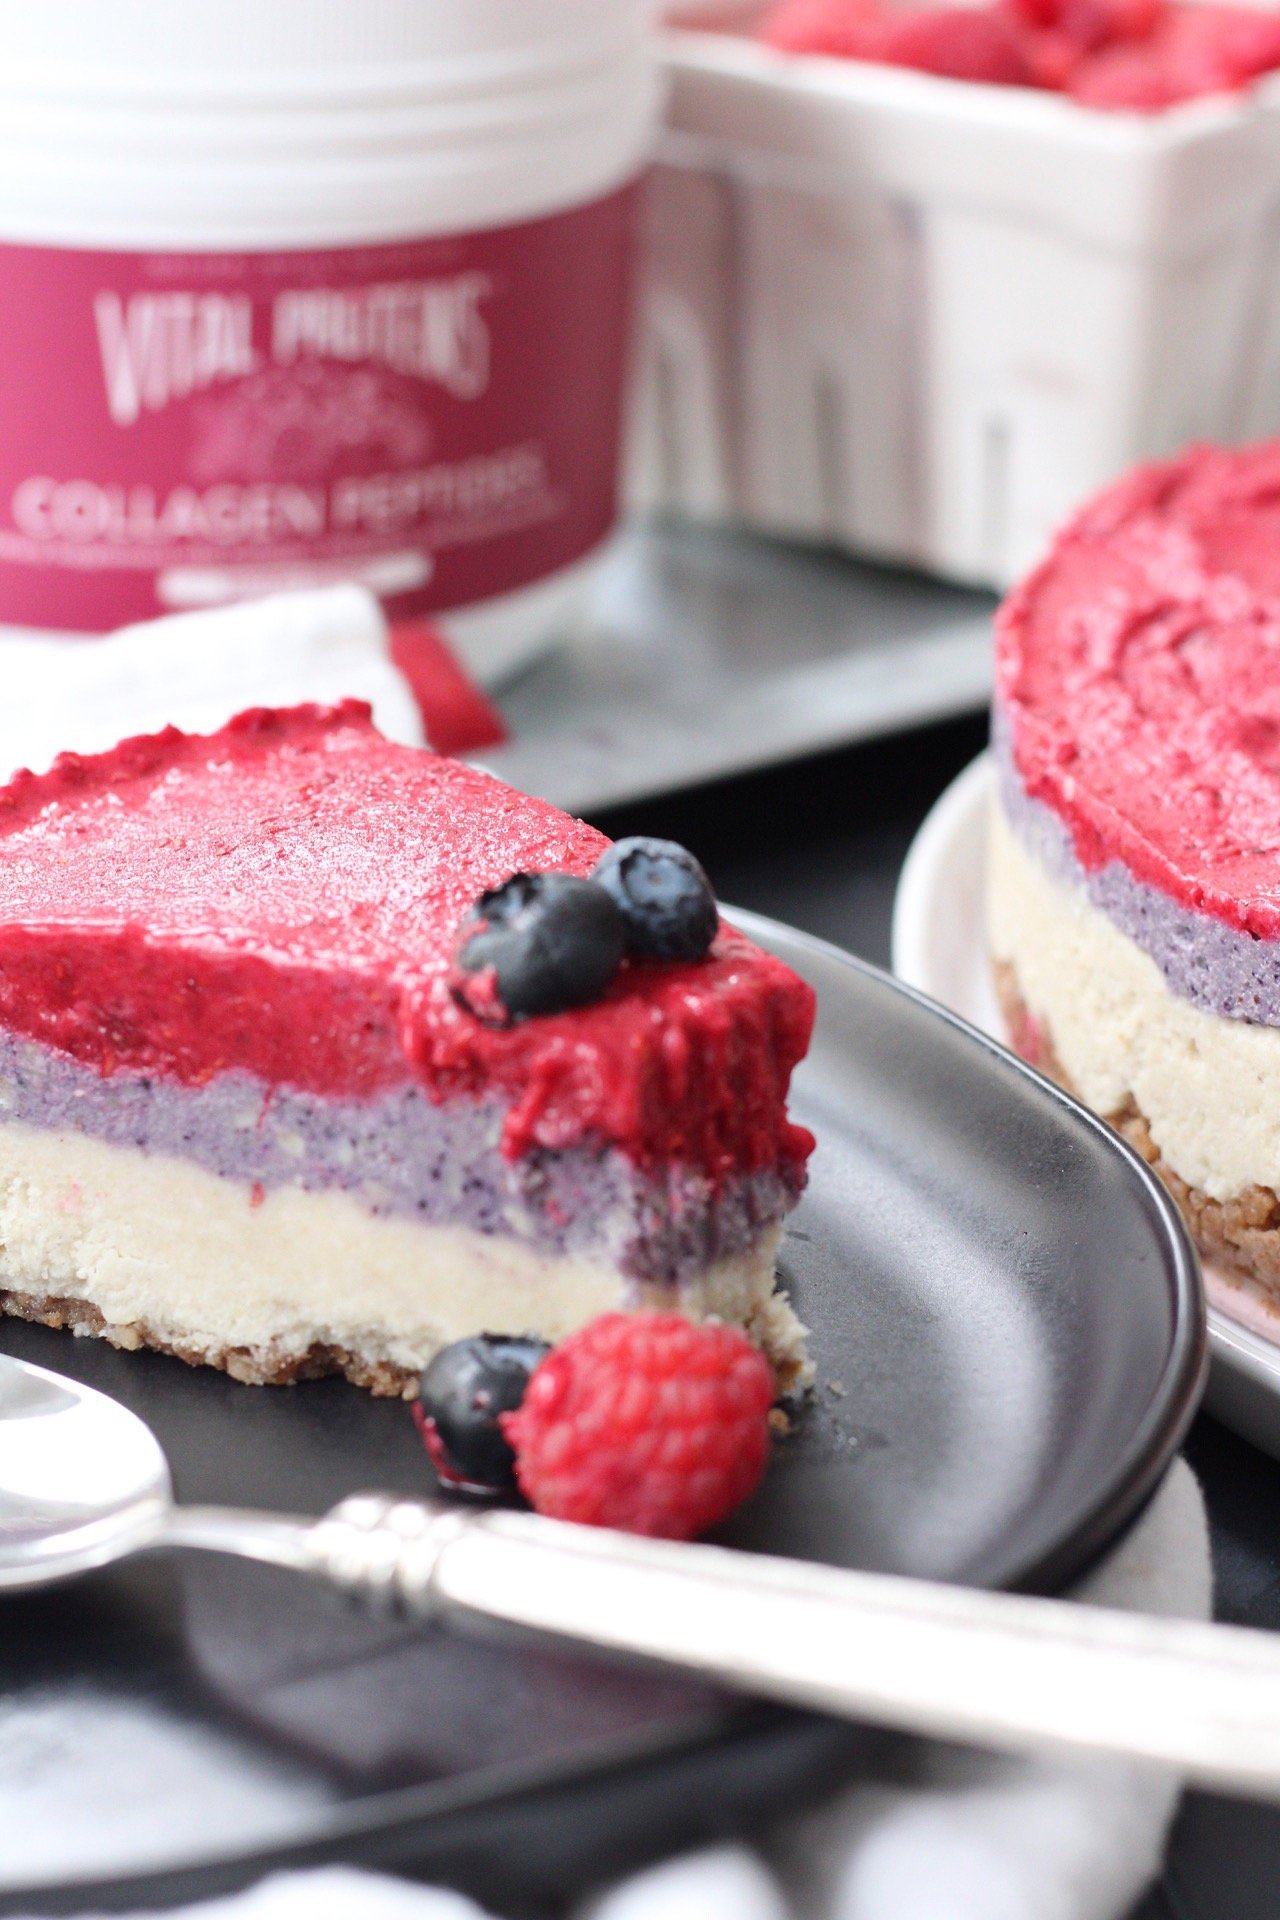 Easy paleo cheesecake is a fun recipe to make for any special occasion or just for dessert! With colorful dairy free cheesecake layers and a simple no bake crust, you'll feel like you're indulging when you're eating totally healthy! #paleocheesecake #dairyfreecheesecake #nobakecheesecake #vegancheesecake